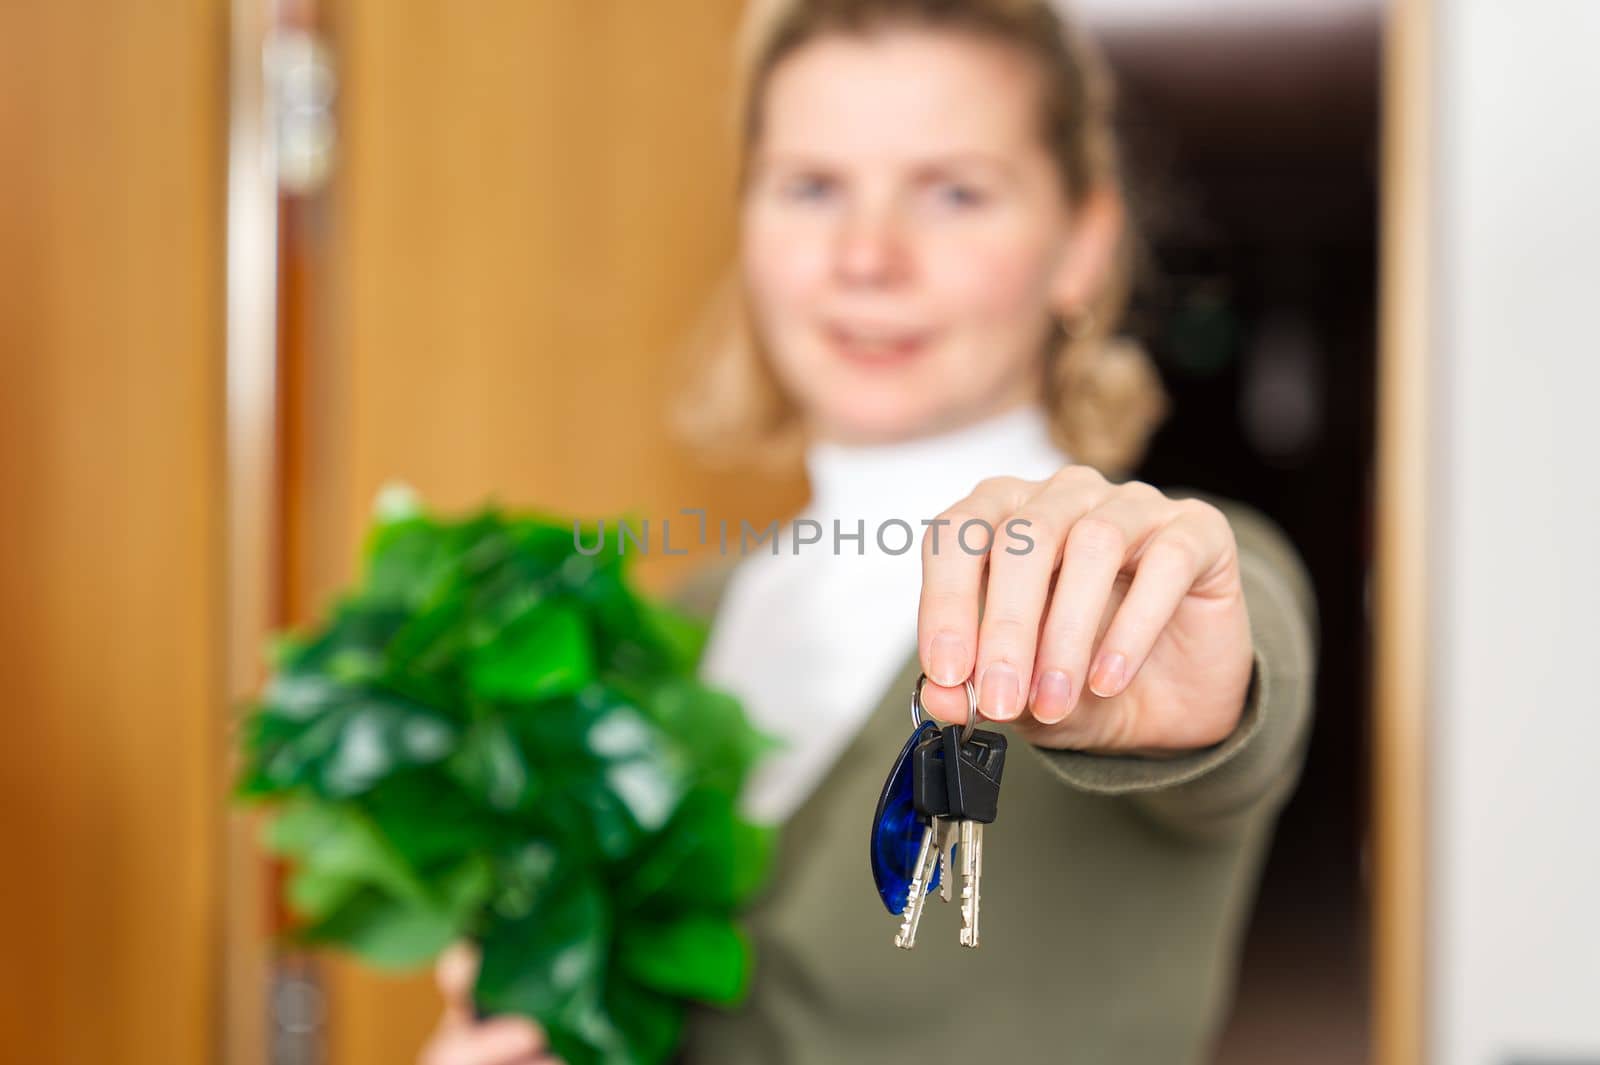 Starting new life. Overjoyed woman hold keys from new apartment or home. new life starts now by PhotoTime